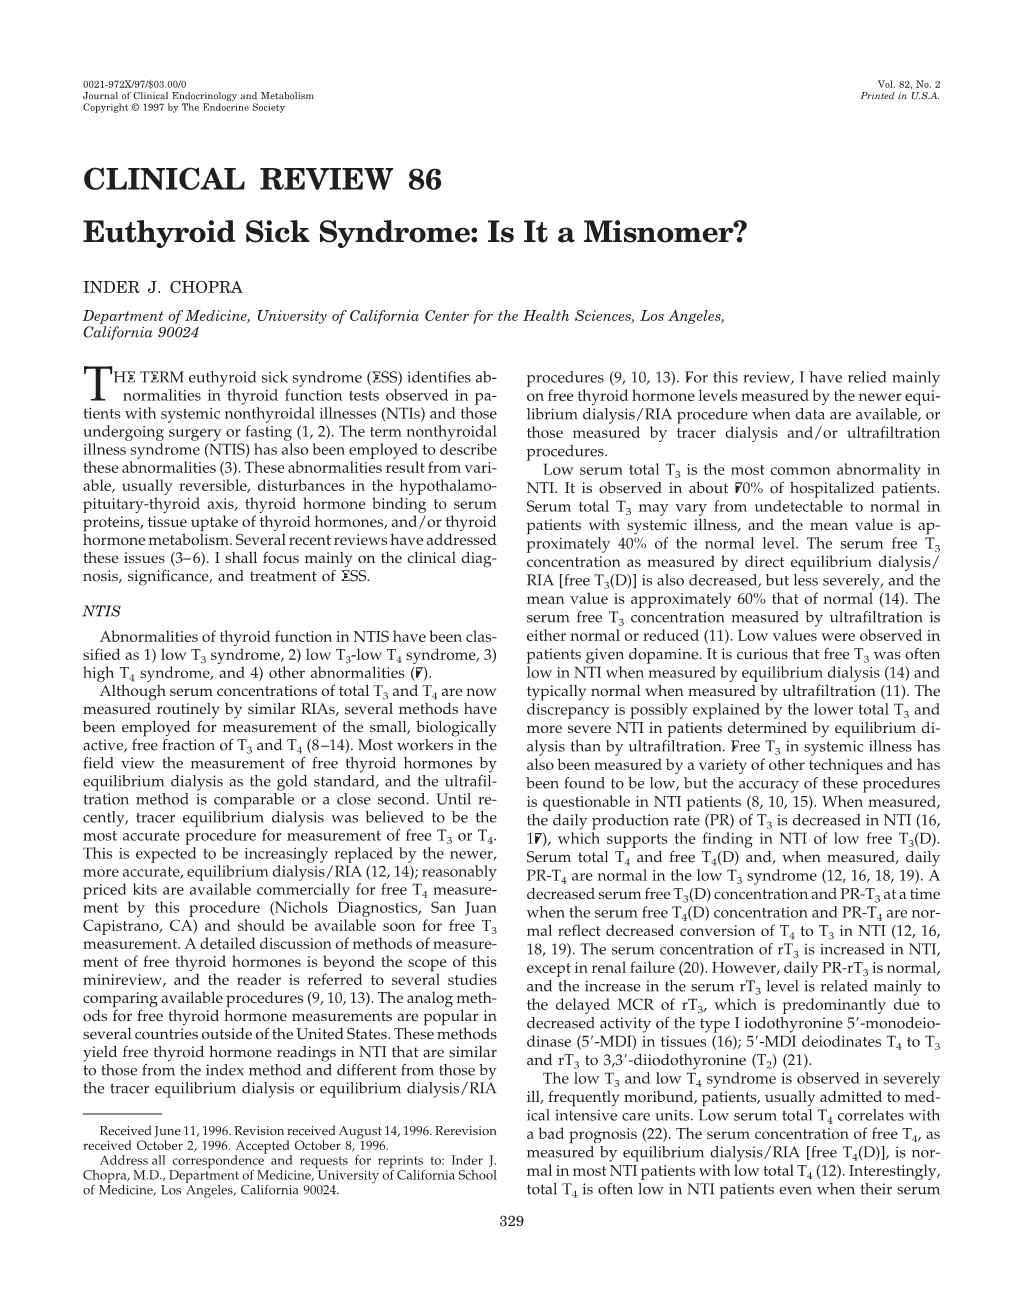 CLINICAL REVIEW 86 Euthyroid Sick Syndrome: Is It a Misnomer?